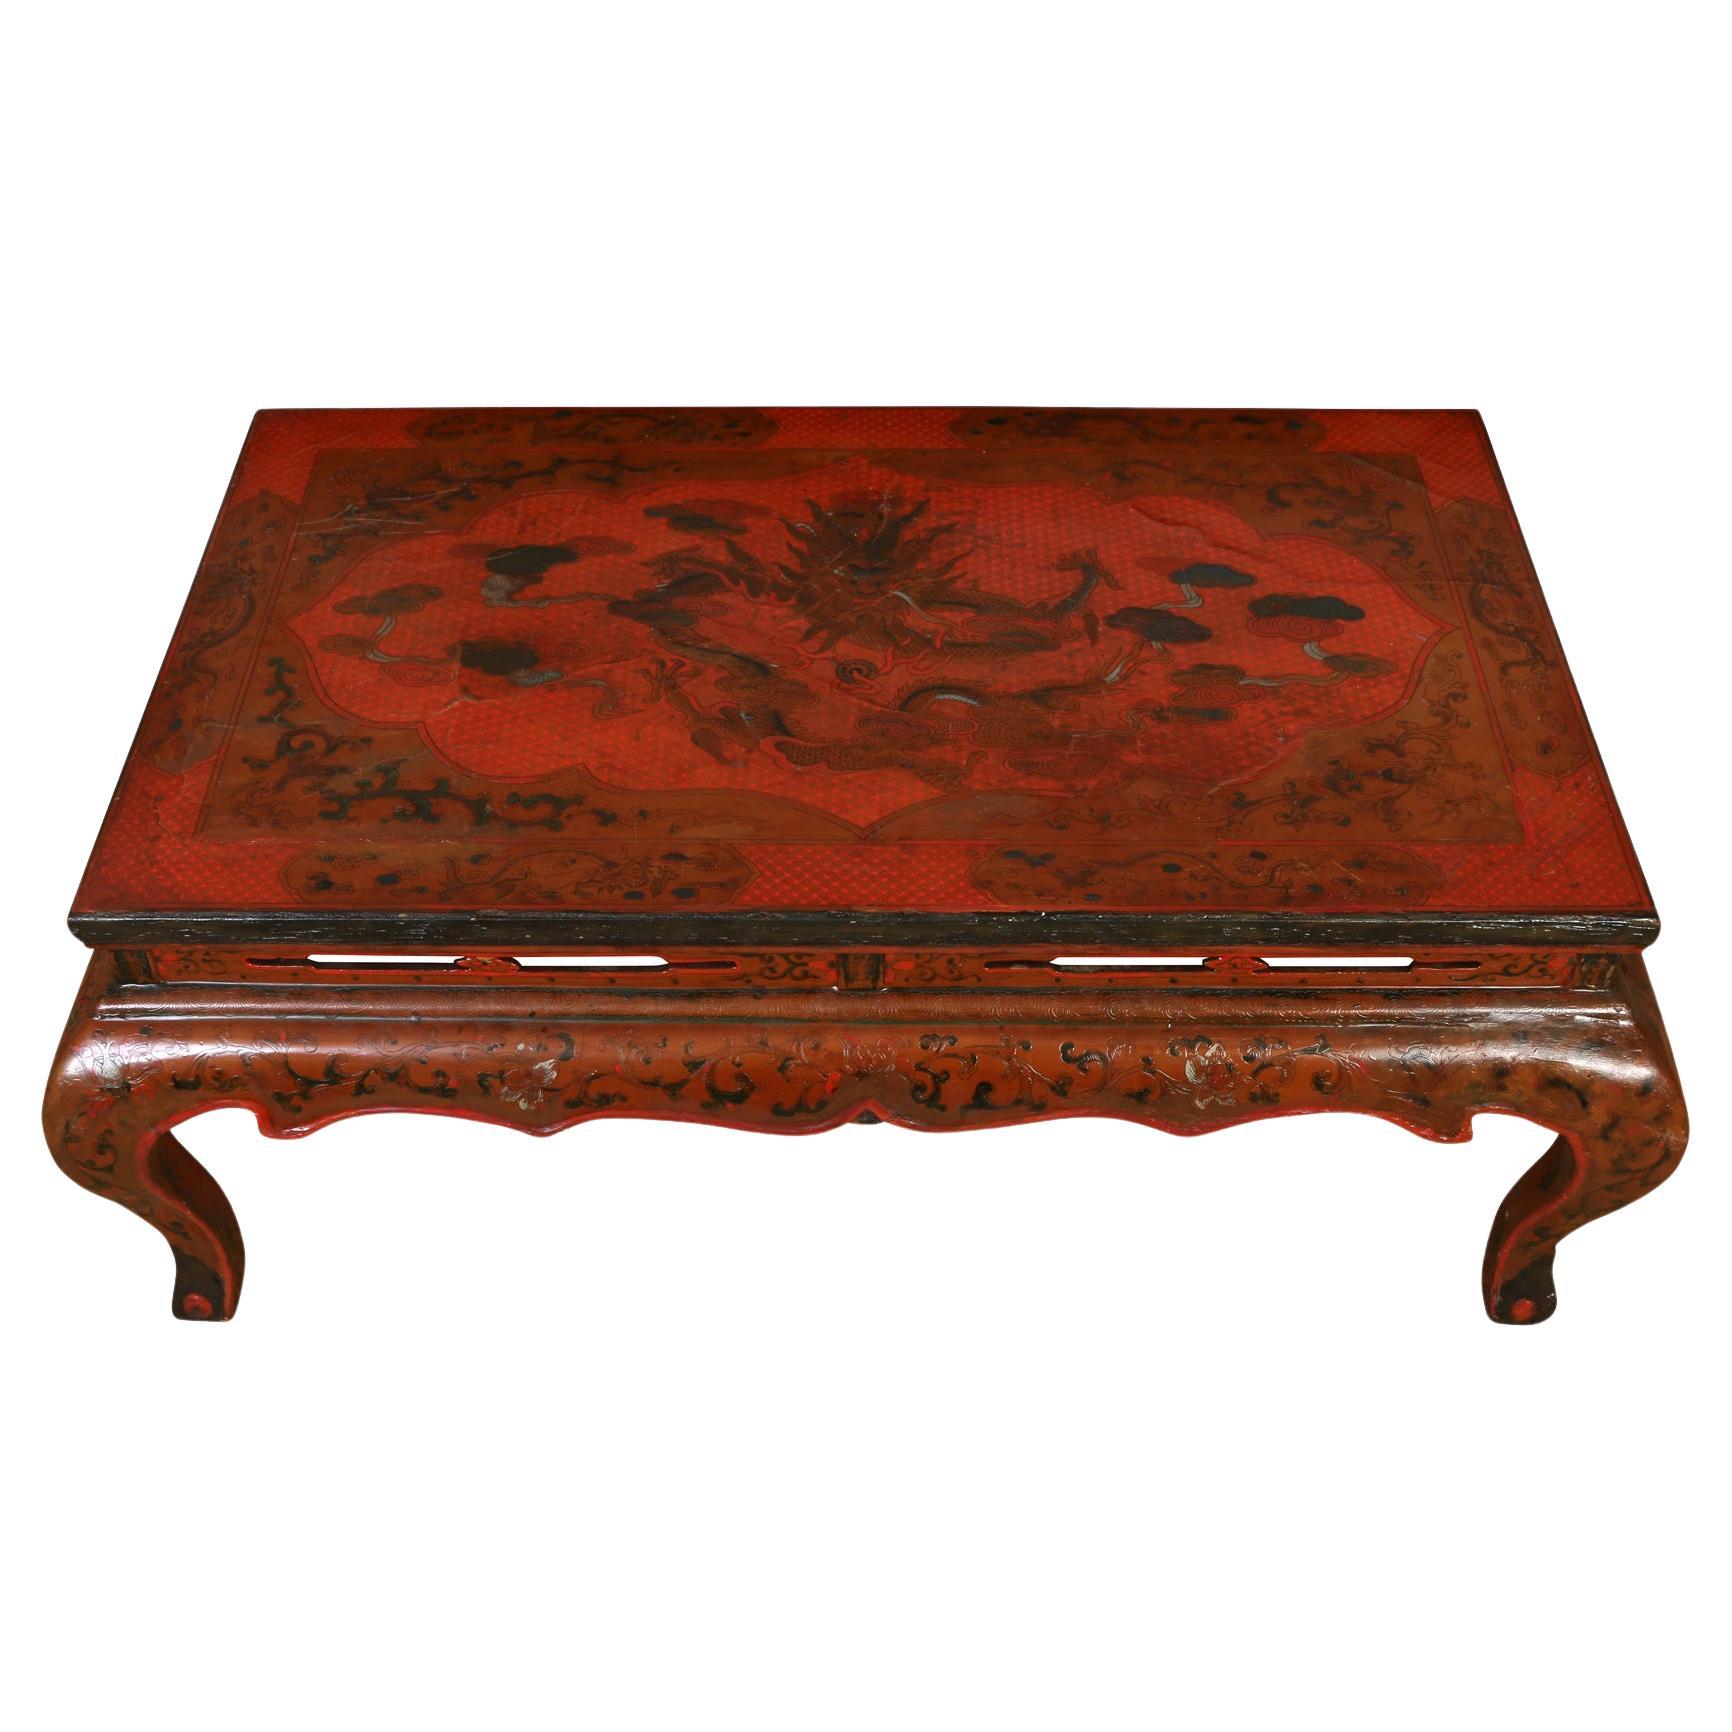 Chinese Red Dragon Motif Coromandel Lacquer Coffee Table For Sale